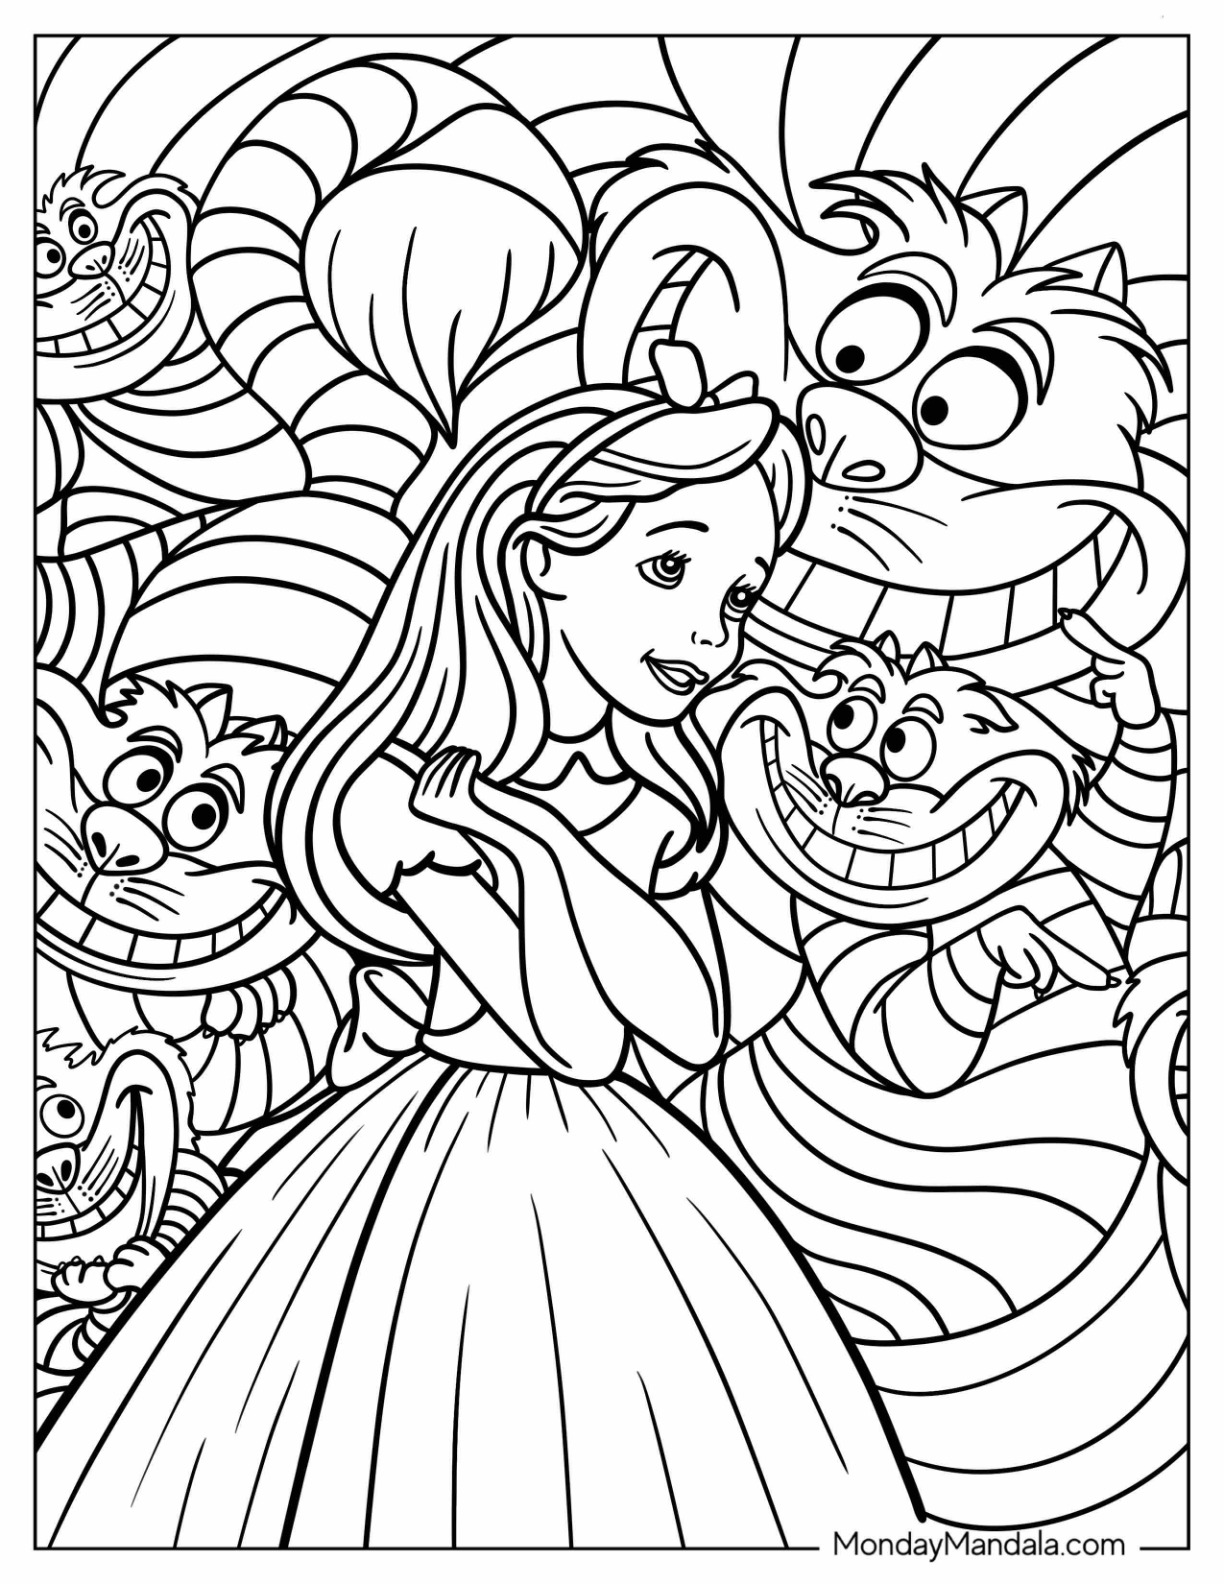 Disney coloring pages for adults free pdf printables